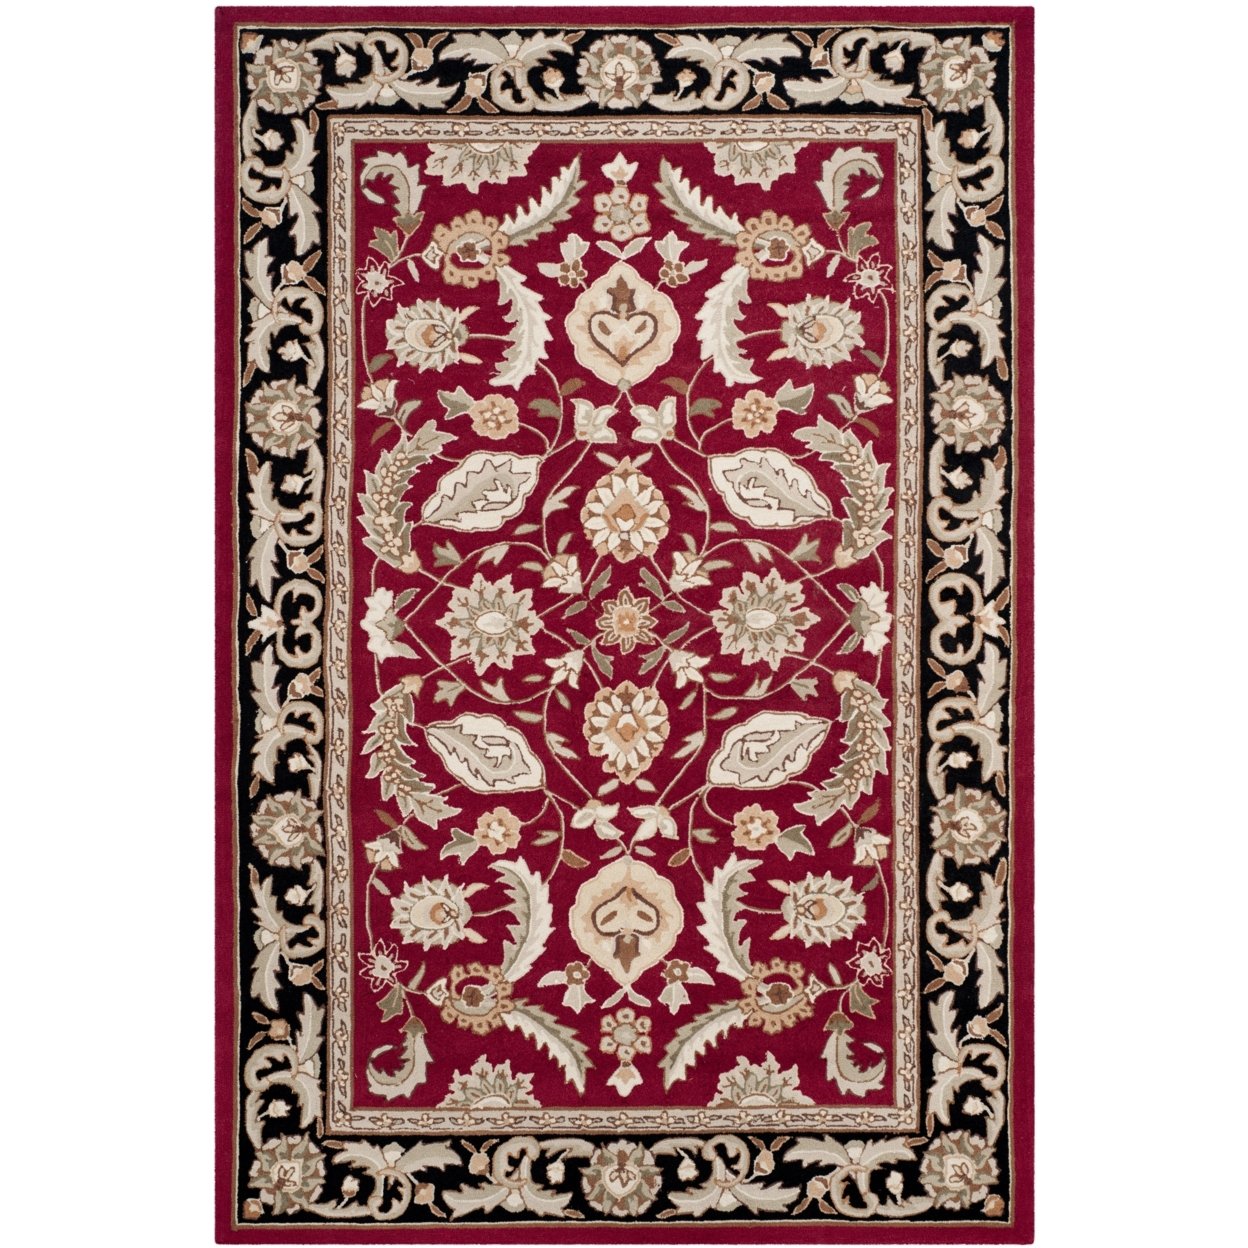 SAFAVIEH Easy Care EZC454A Hand-hooked Red Rug - 6' X 9'